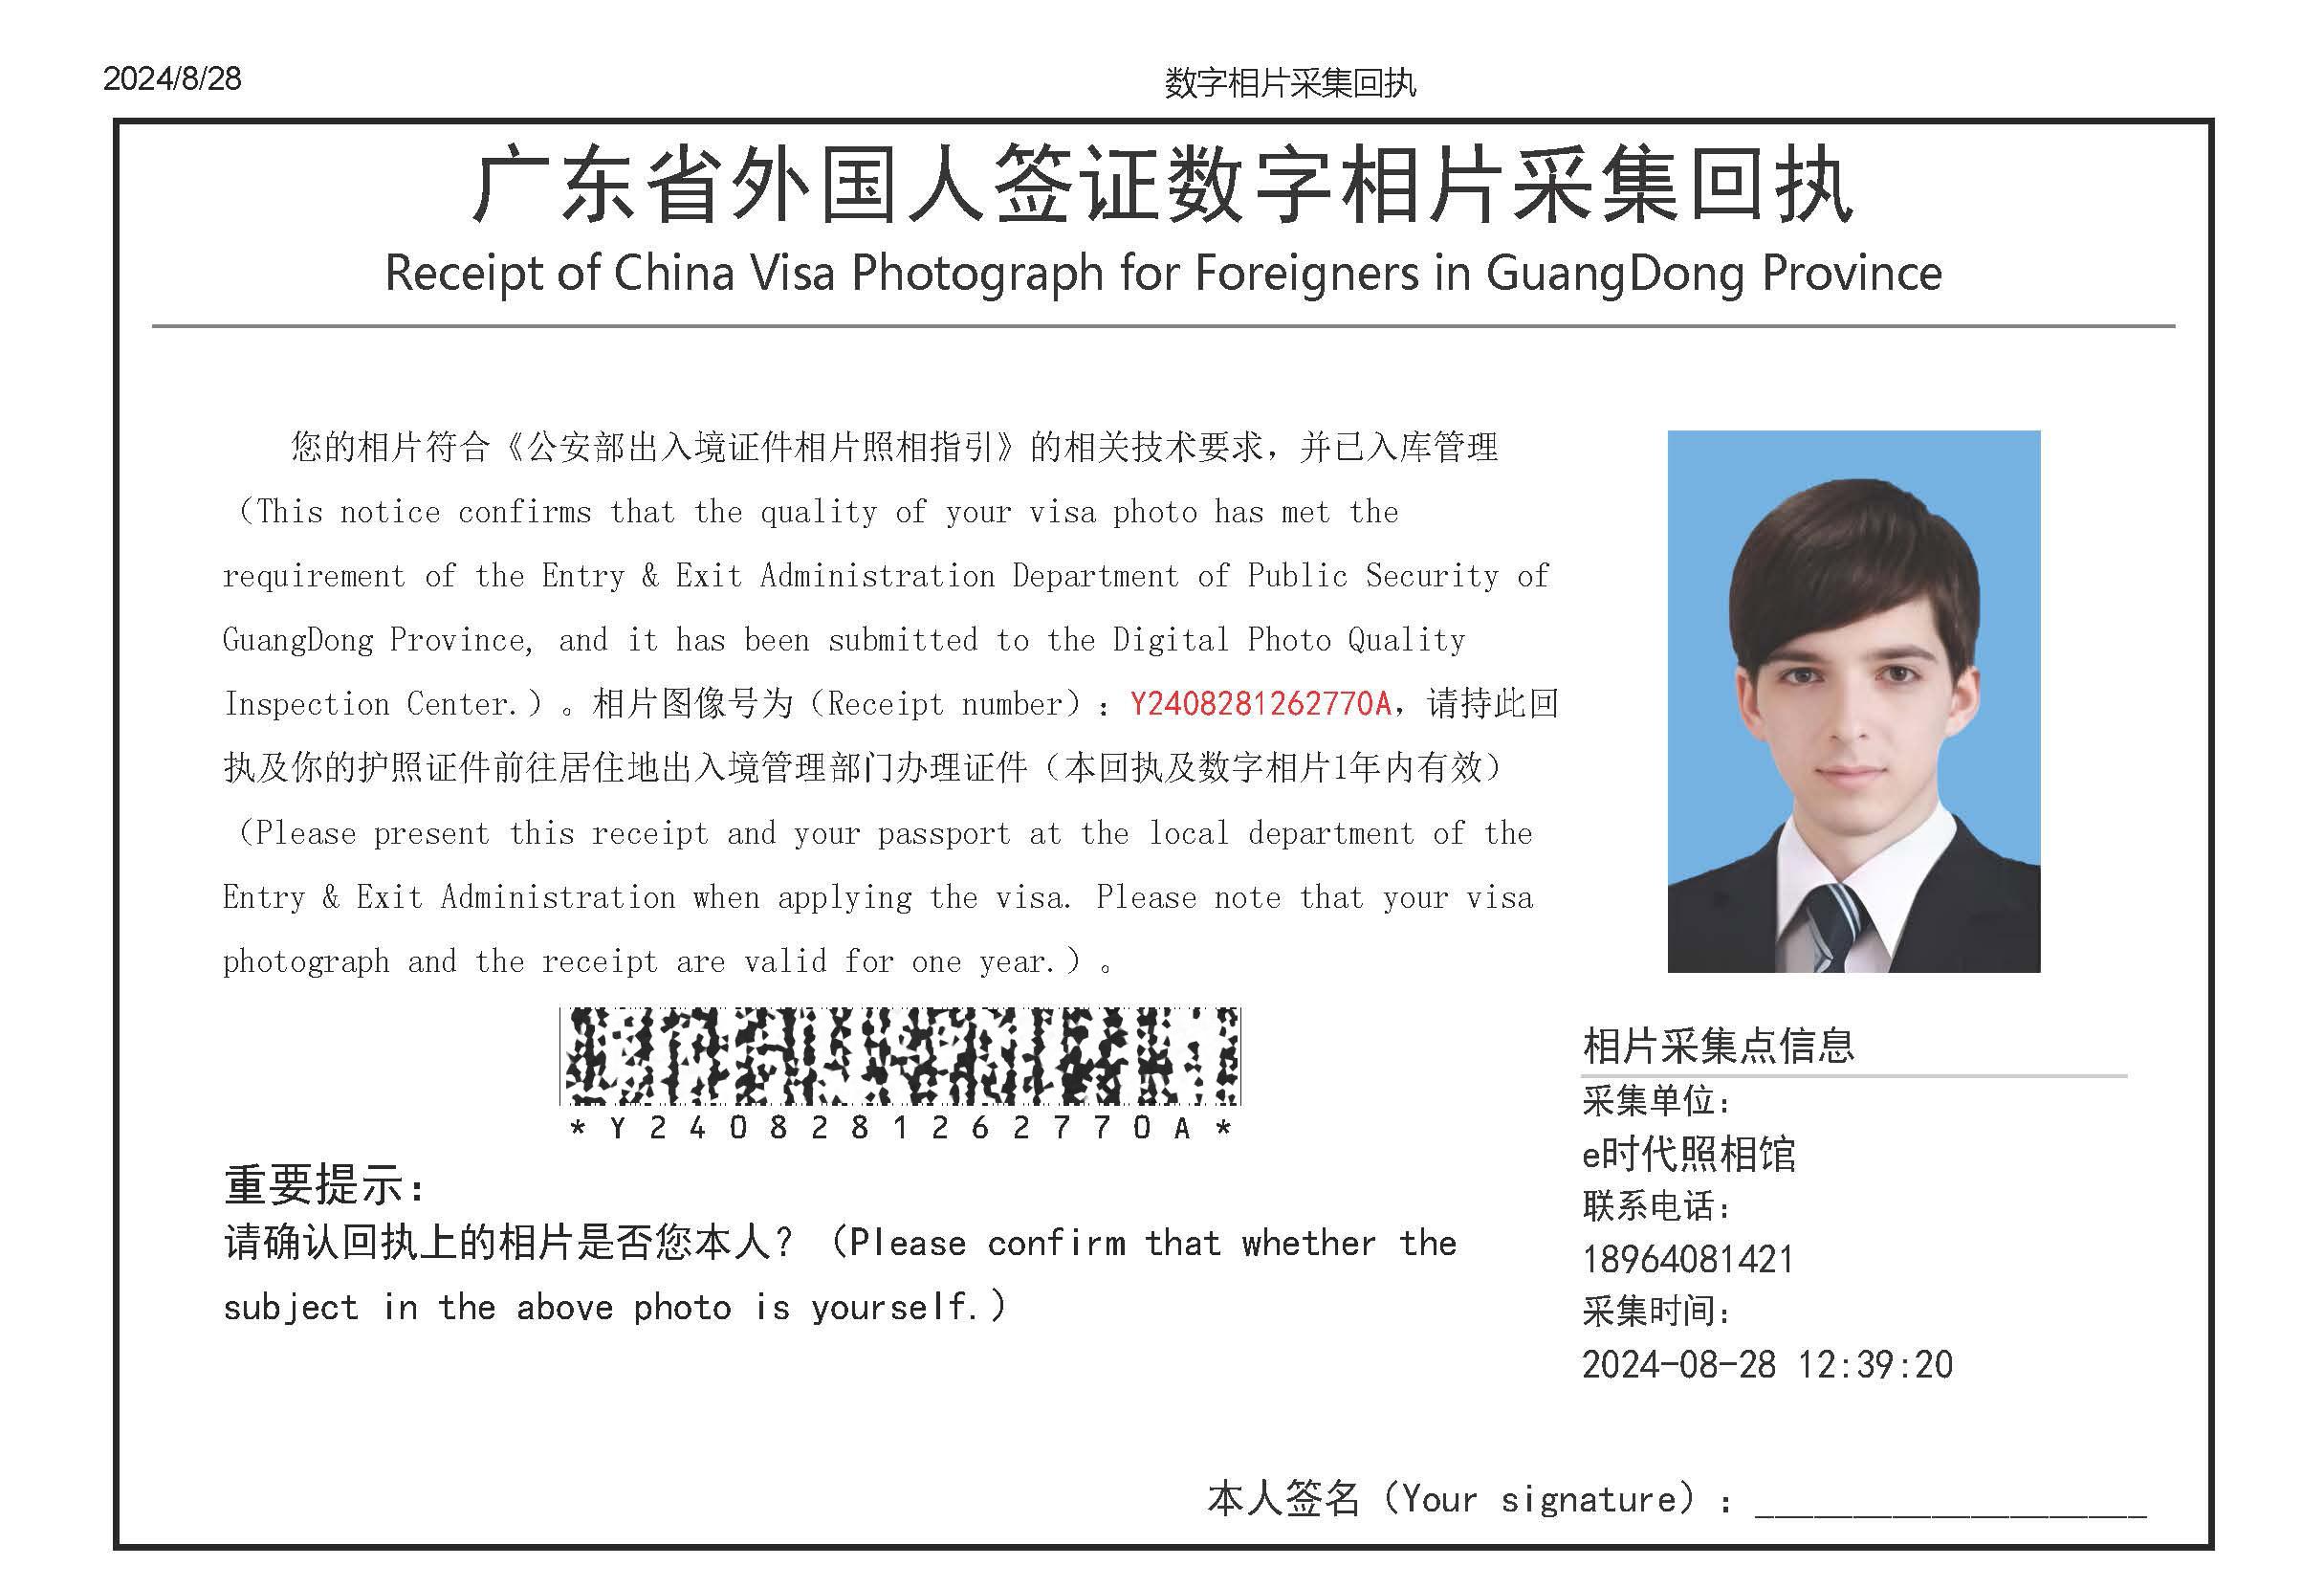 Receipt of China Visa Photograph for Foreigners